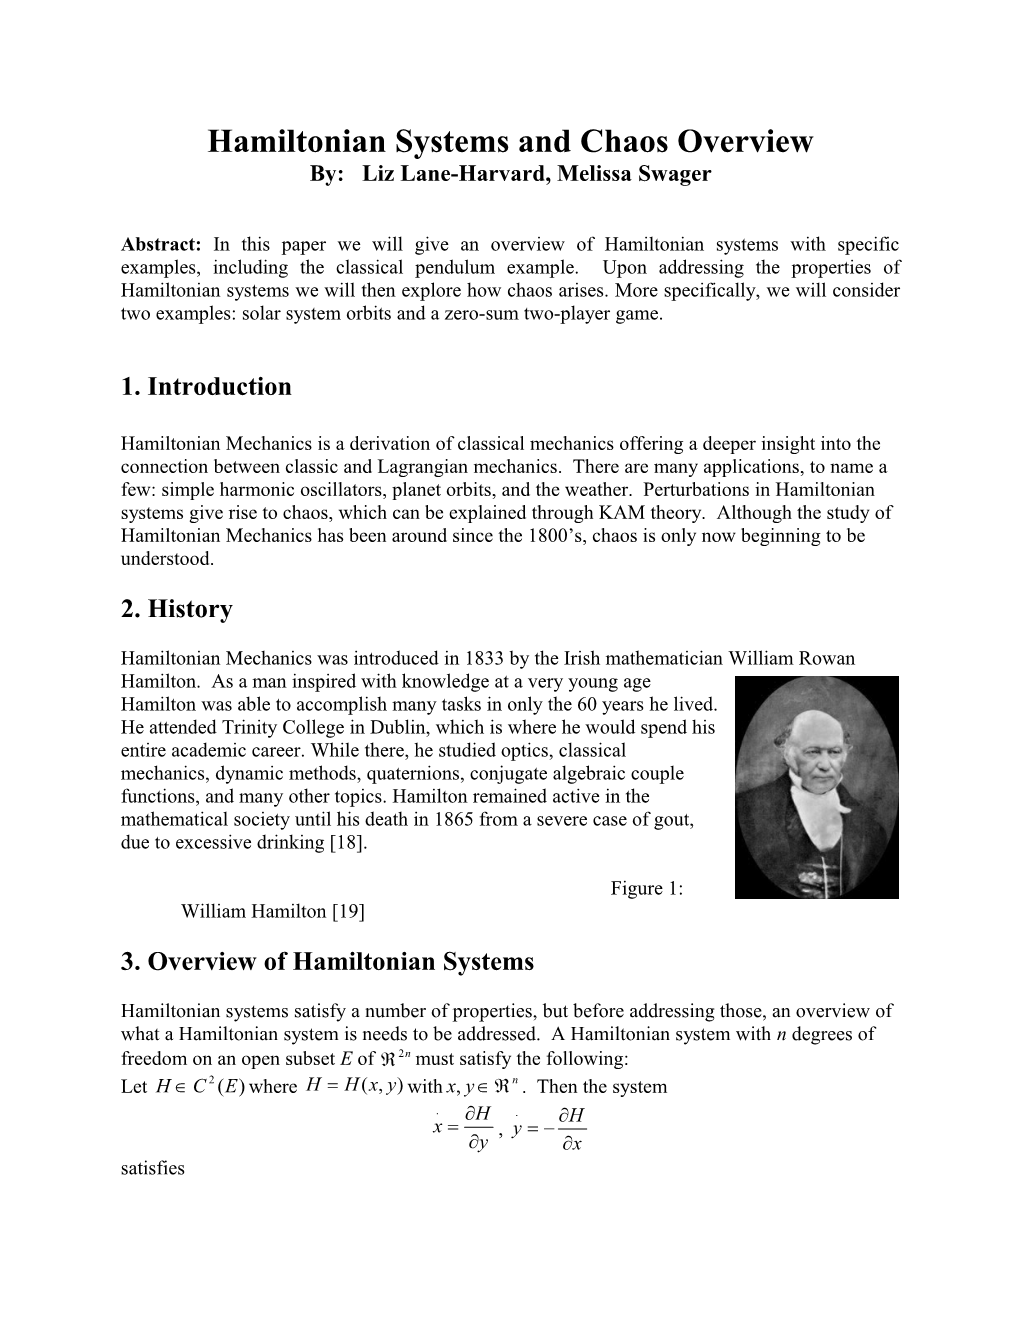 Overview of Hamiltonian Systems